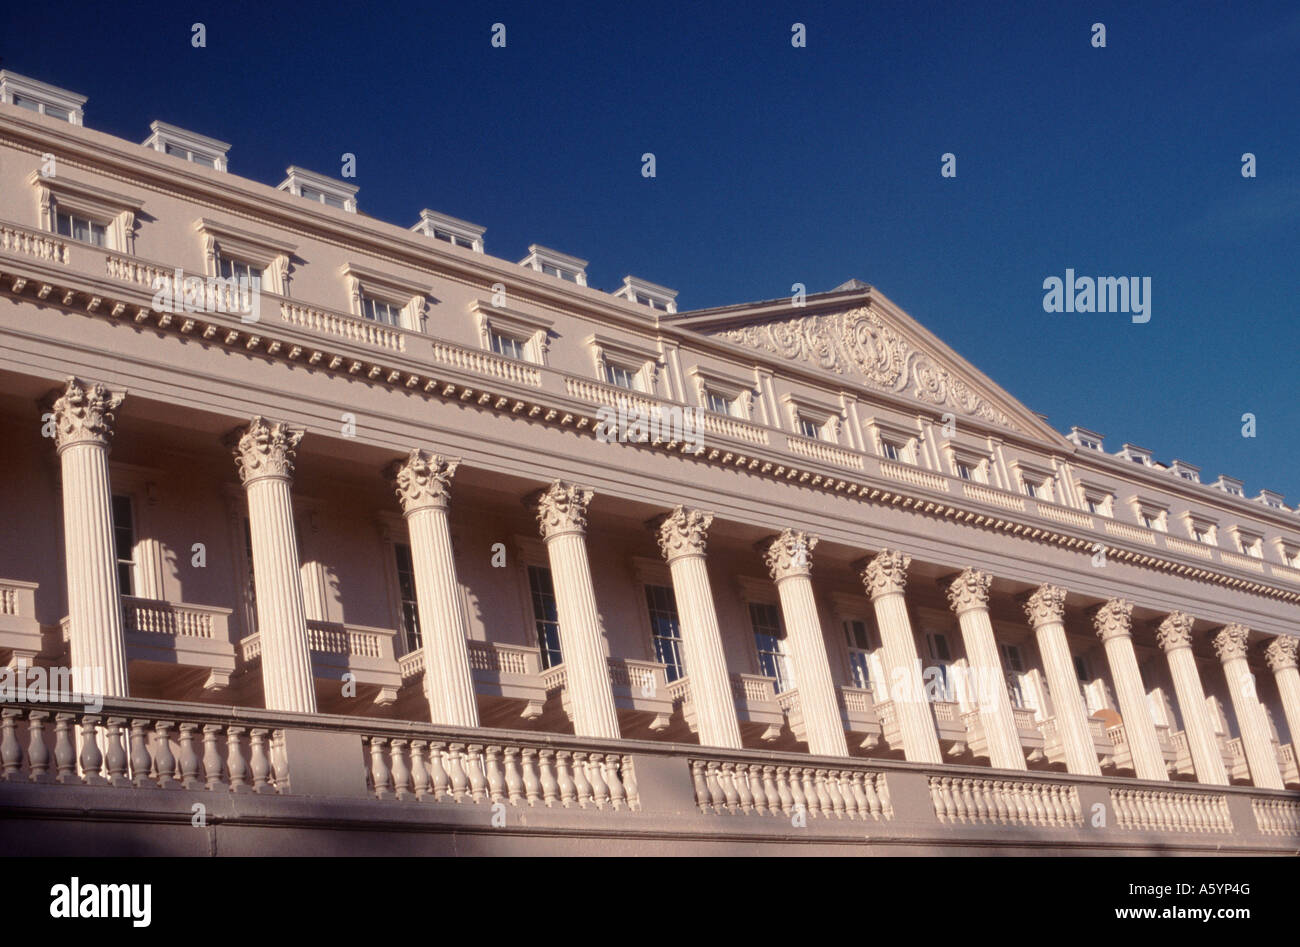 Columns, porches and roofline of Carlton House Terrace on a diagonal tilt, overlooking The Mall, Westminster, London, England Stock Photo